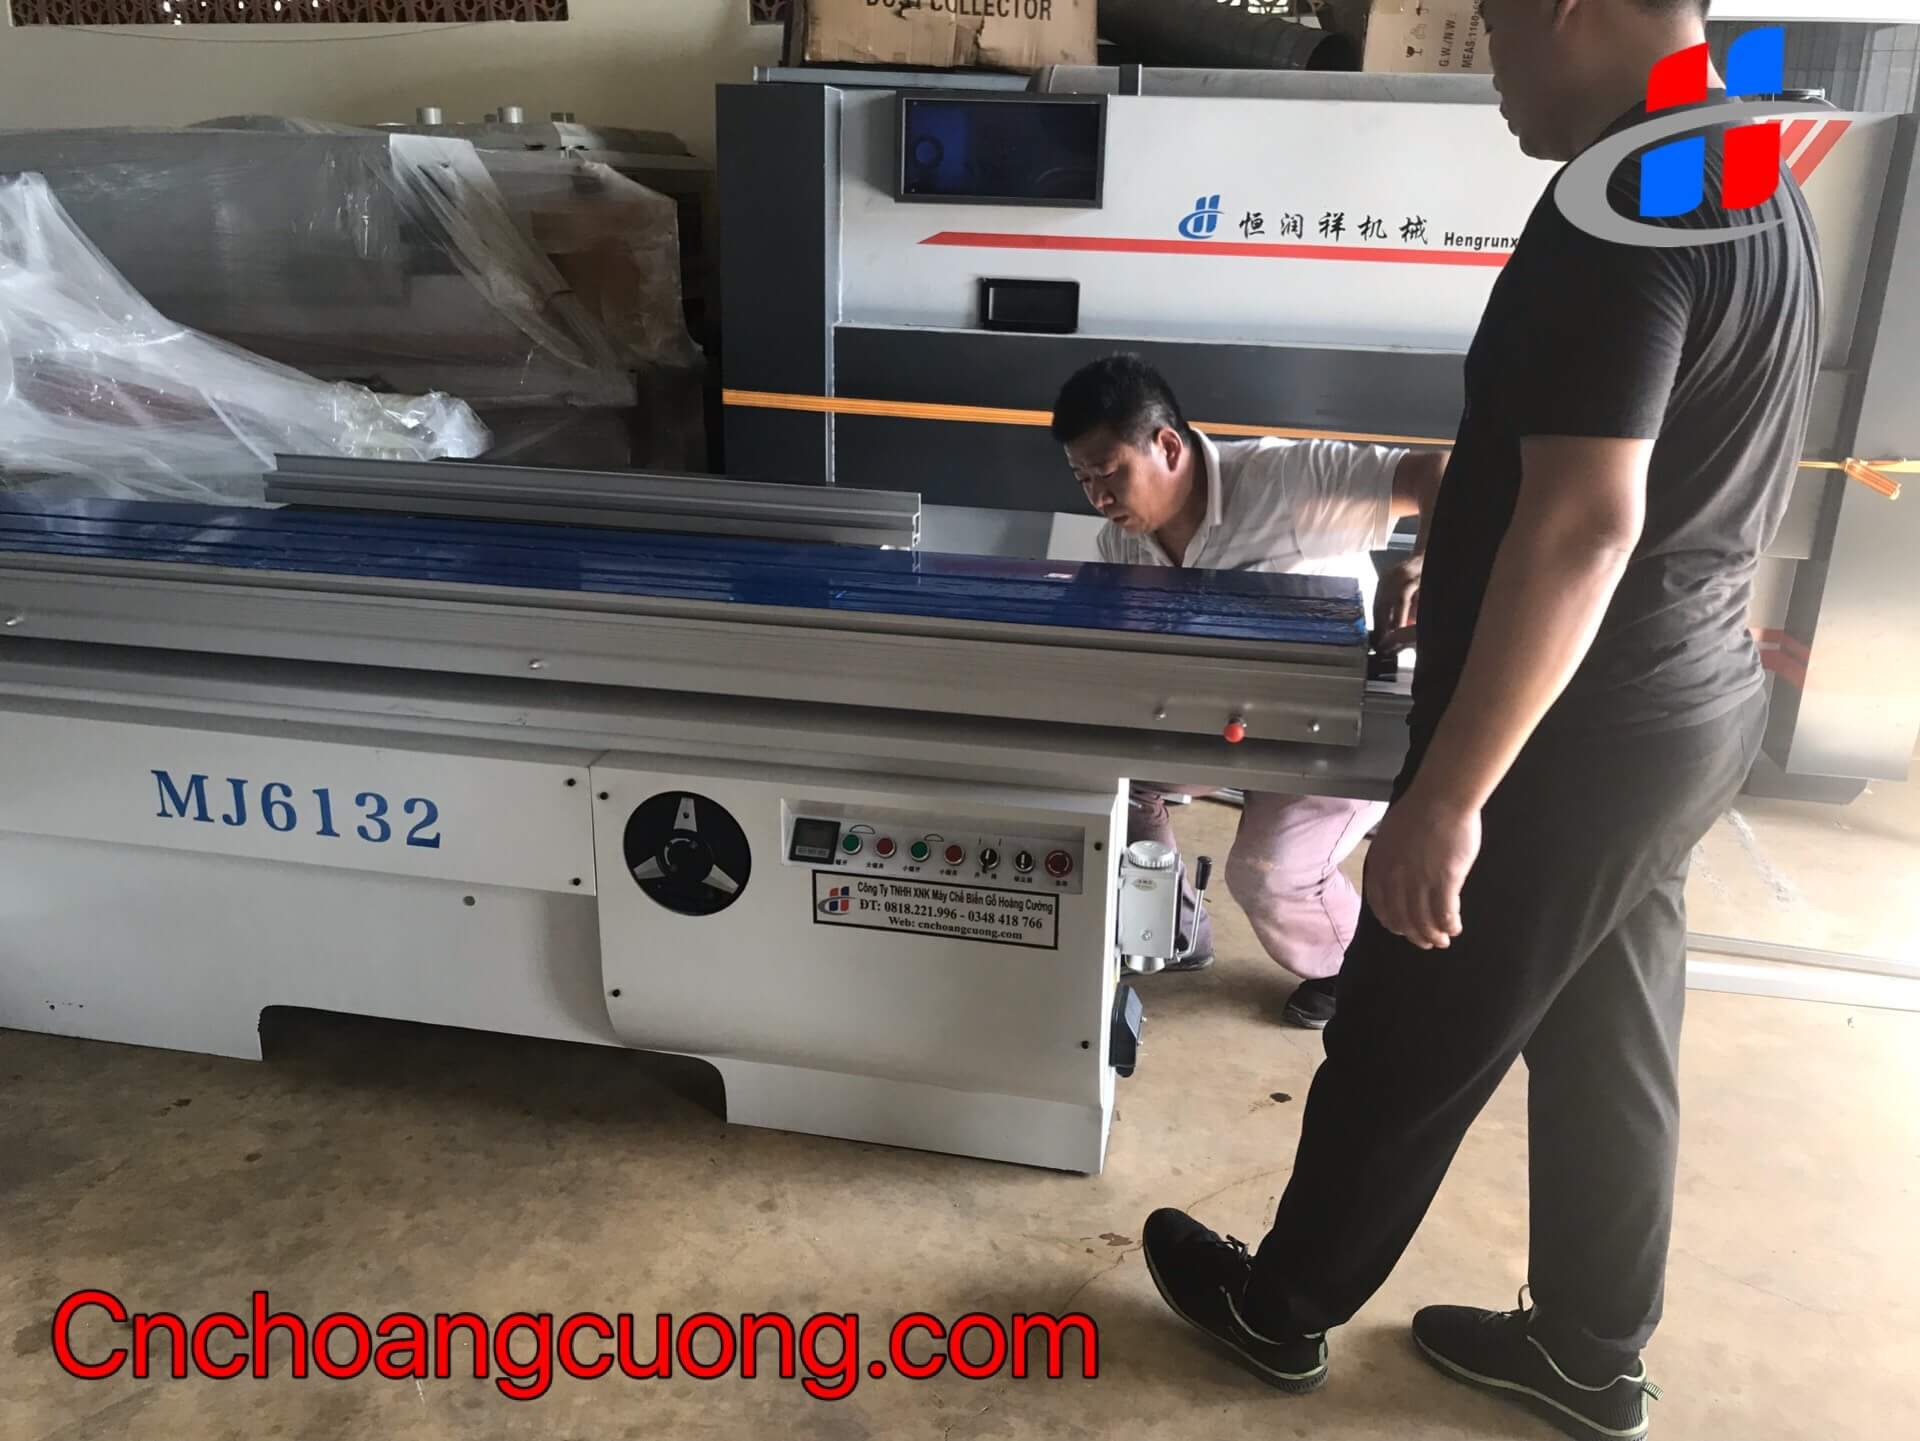 https://cnchoangcuong.com/?post_type=product&p=1835&preview=true